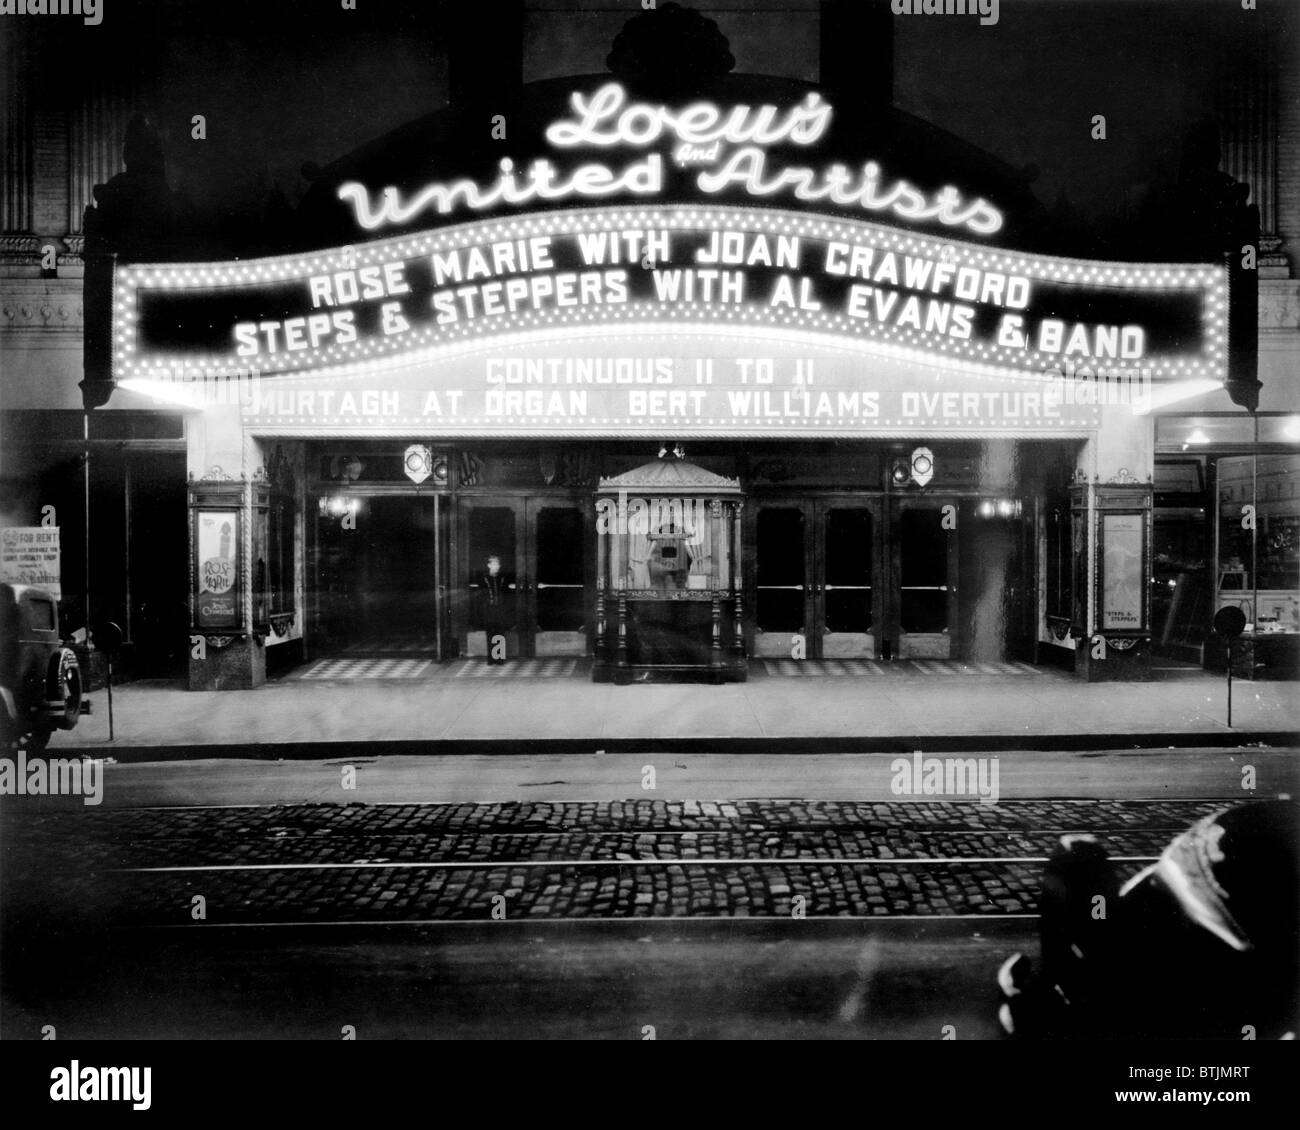 Loew's and United Artists Ohio Theatre, exterior showing ROSE-MARIE, with Joan Crawford, and STEPS 7 STEPPERS, with Al Evans & Band, Continuous 11 to 11, Murtagh at Organ, Bert Williams Overture, 39 East State Street, Columbus, Franklin County, Ohio, 1928. Stock Photo